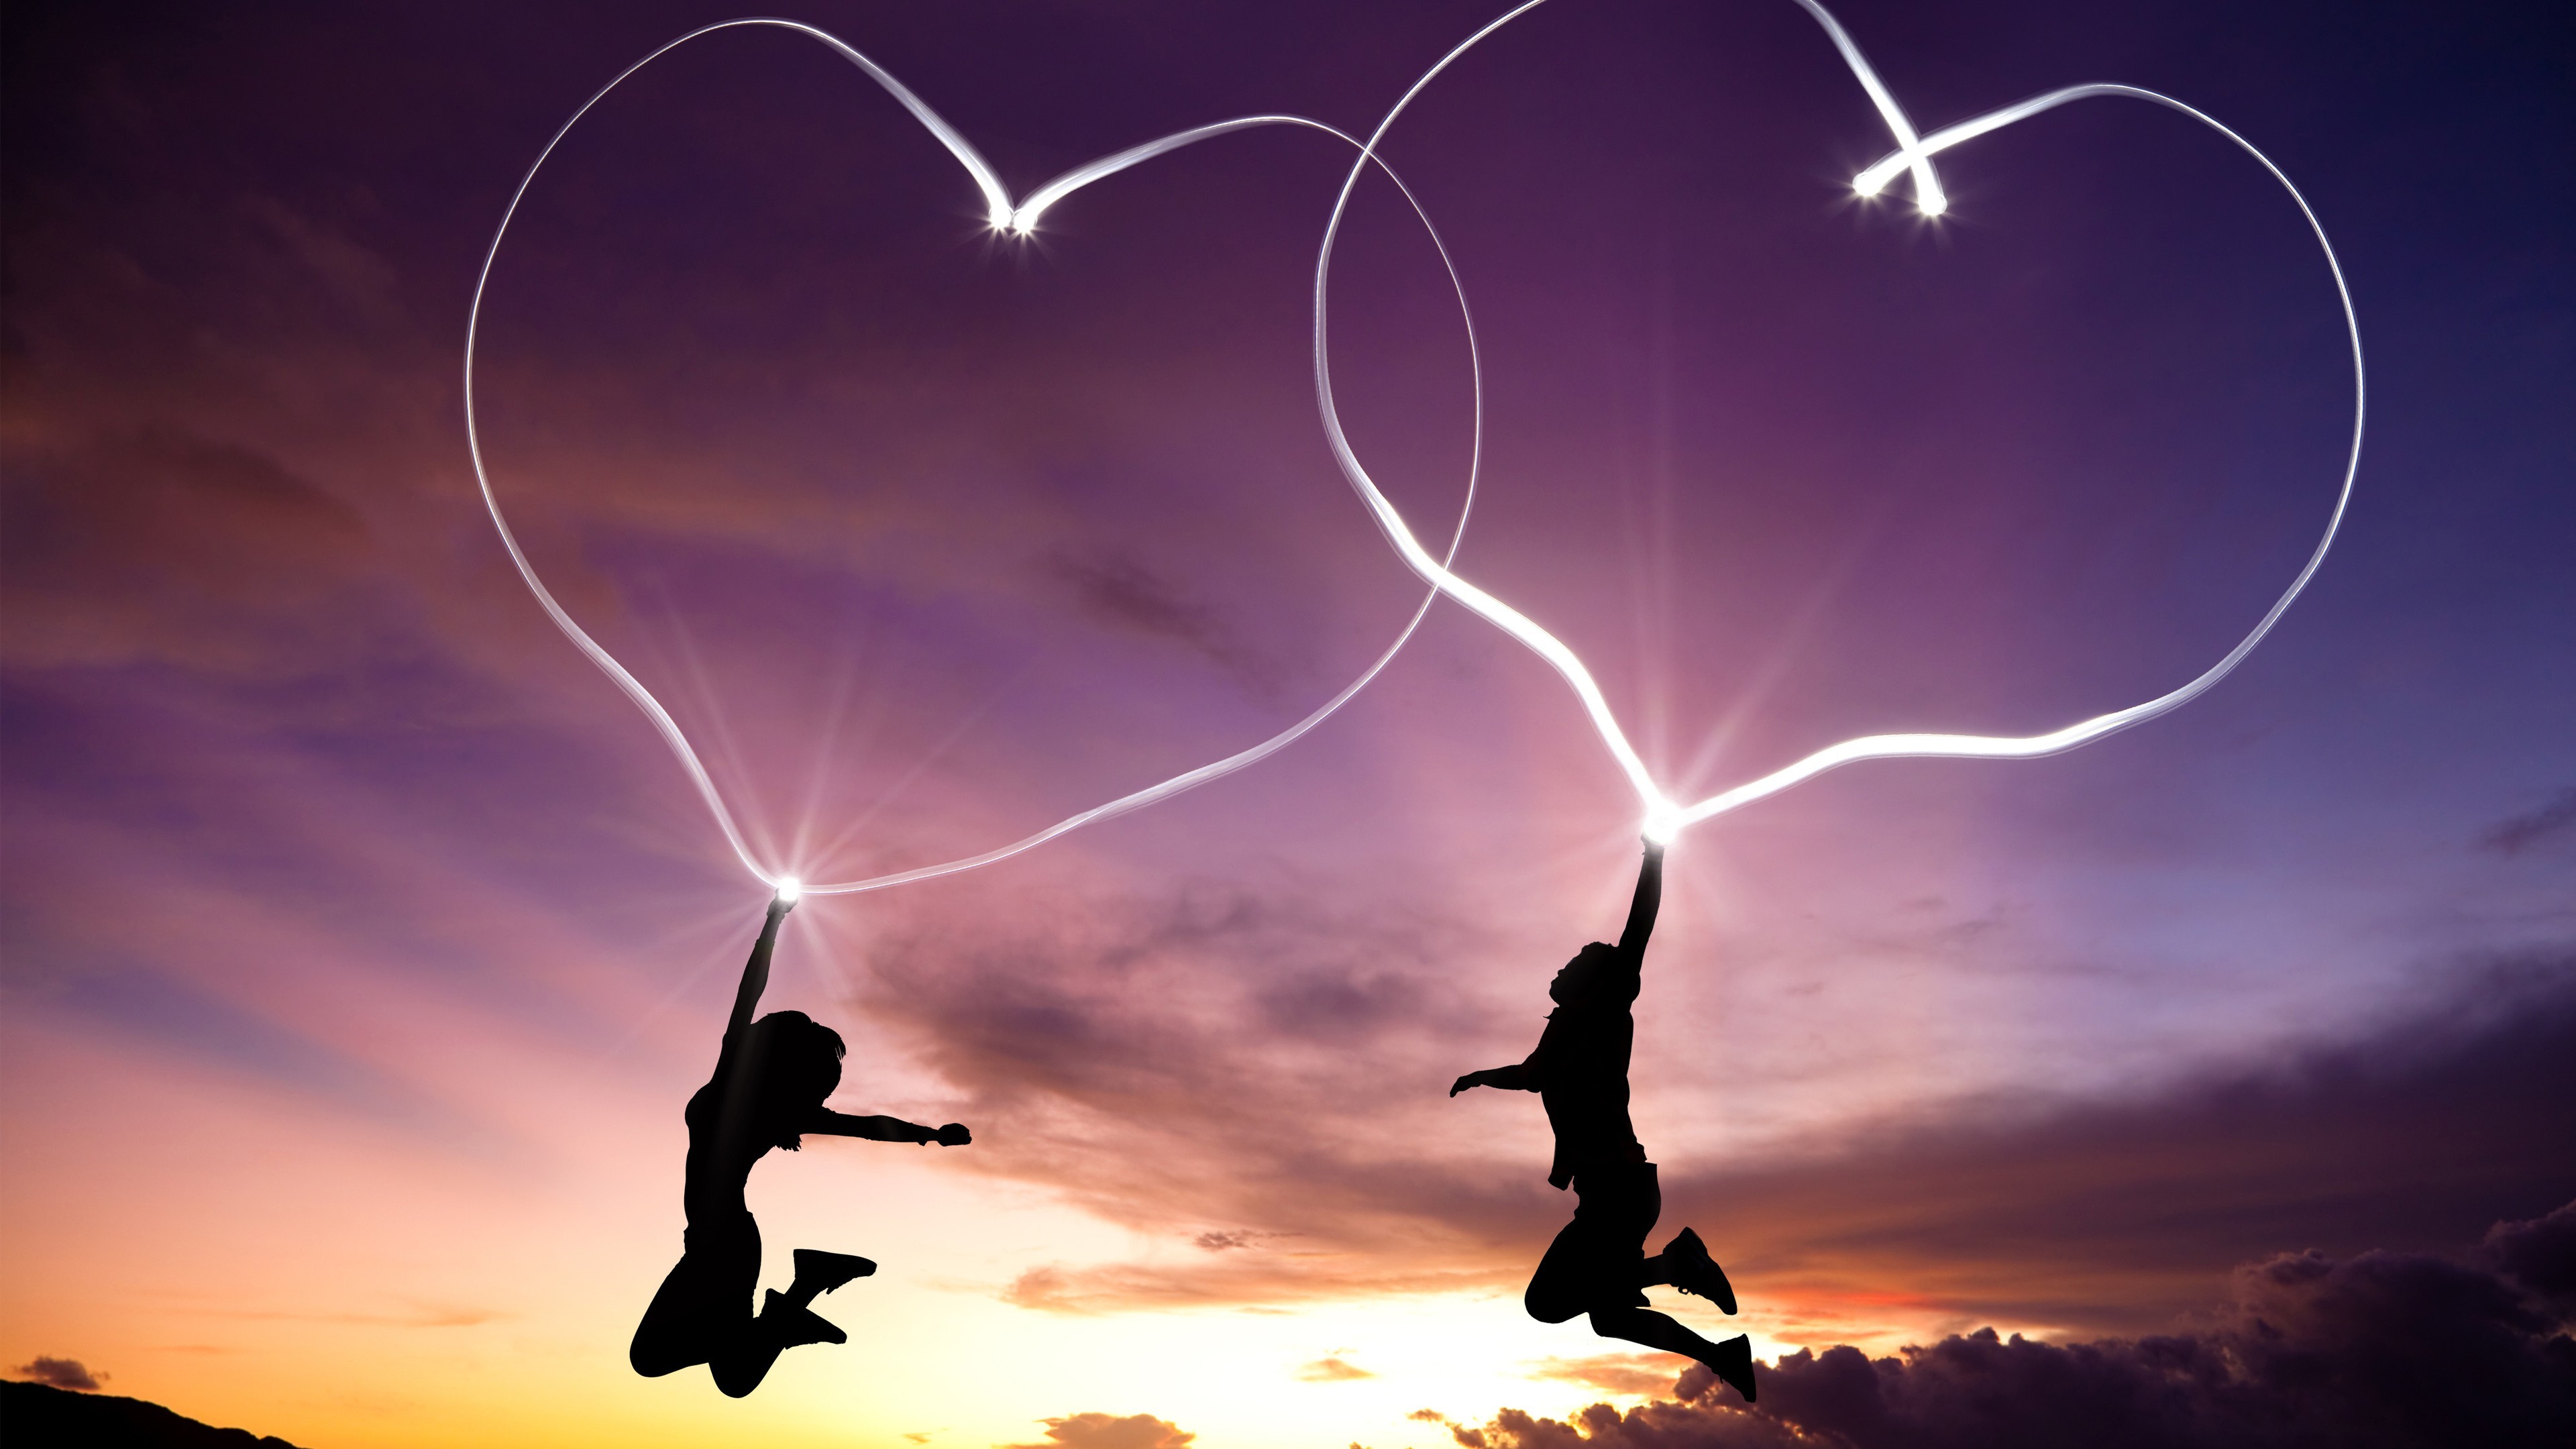 3840x2160 Love wallpapers with two jumping lovers